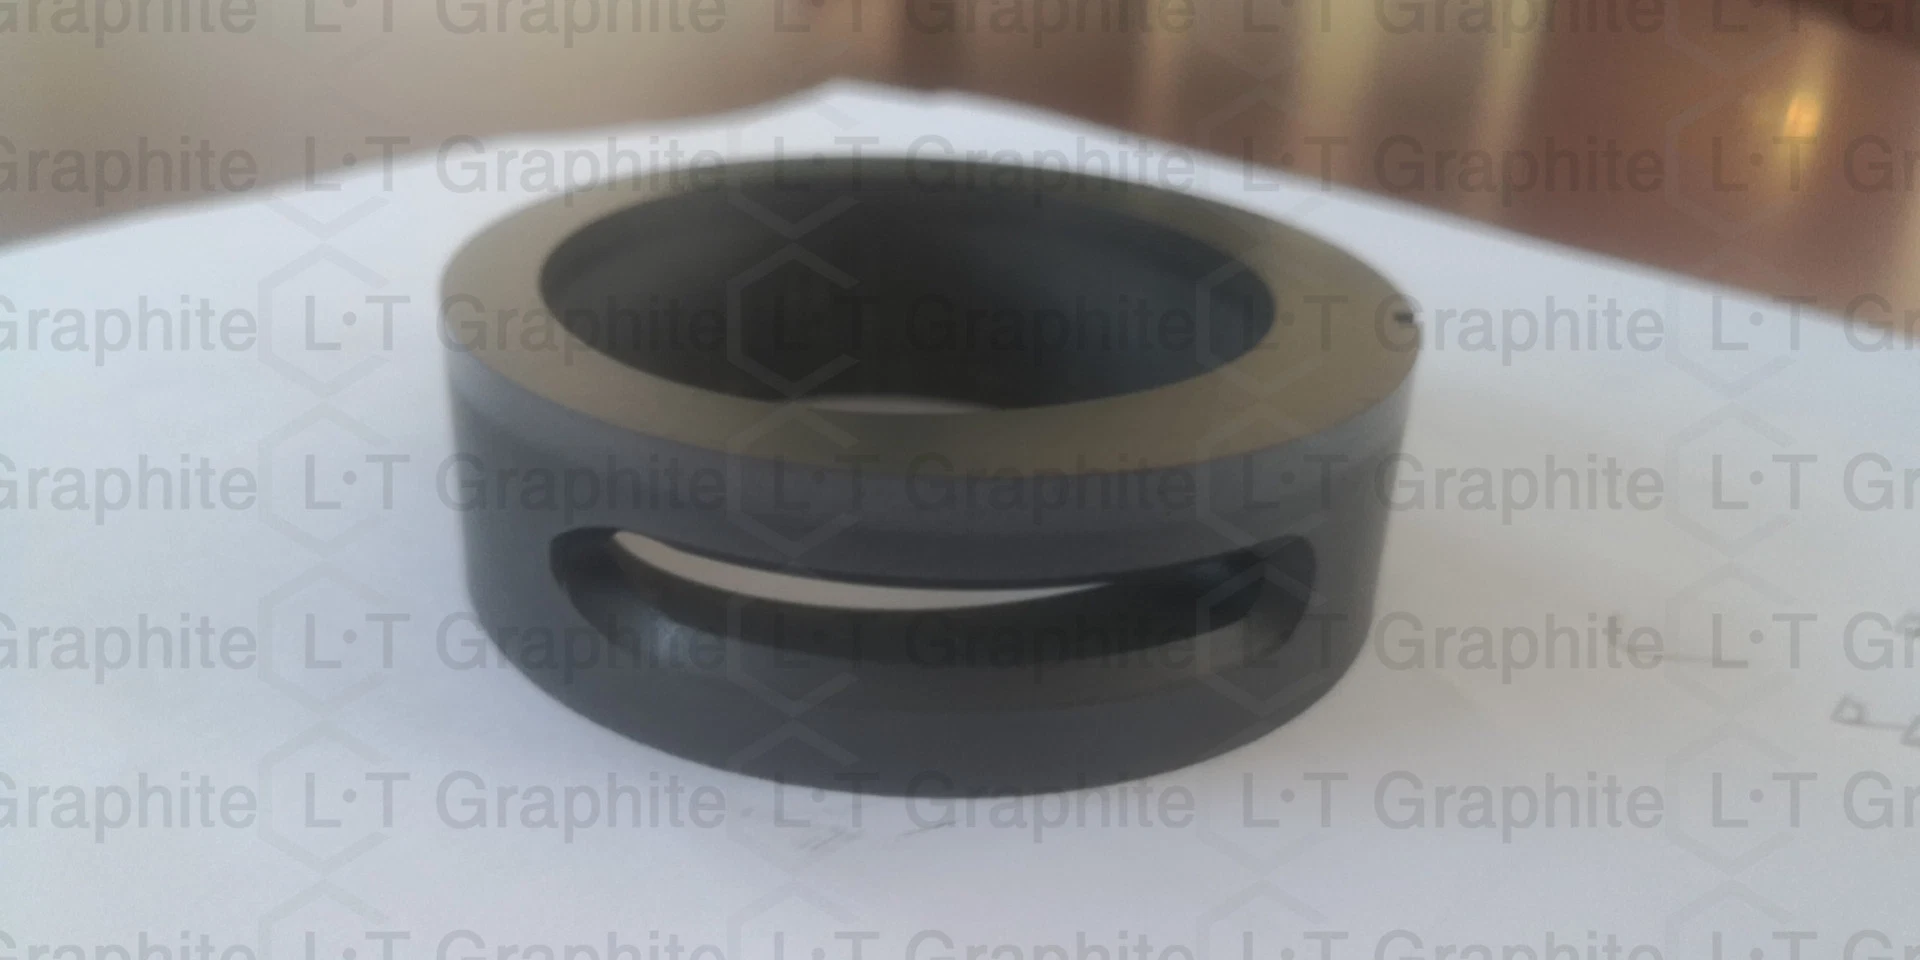 Specialty Resin Graphite Eccentric Ring for Vane Pump